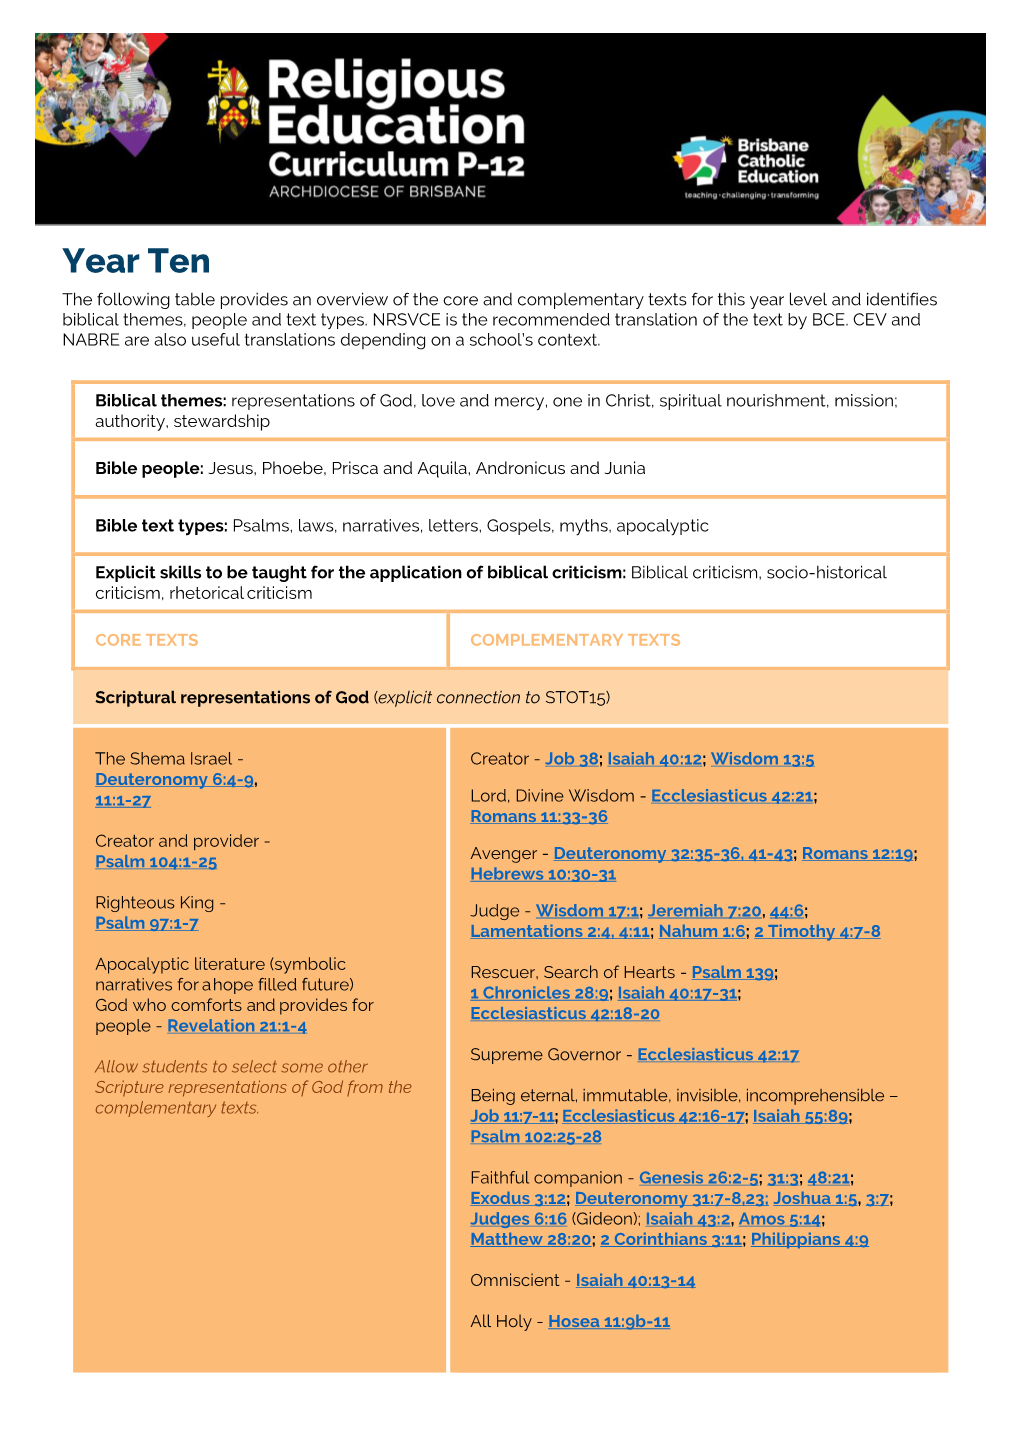 Year Ten the Following Table Provides an Overview of the Core and Complementary Texts for This Year Level and Identifies Biblical Themes, People and Text Types